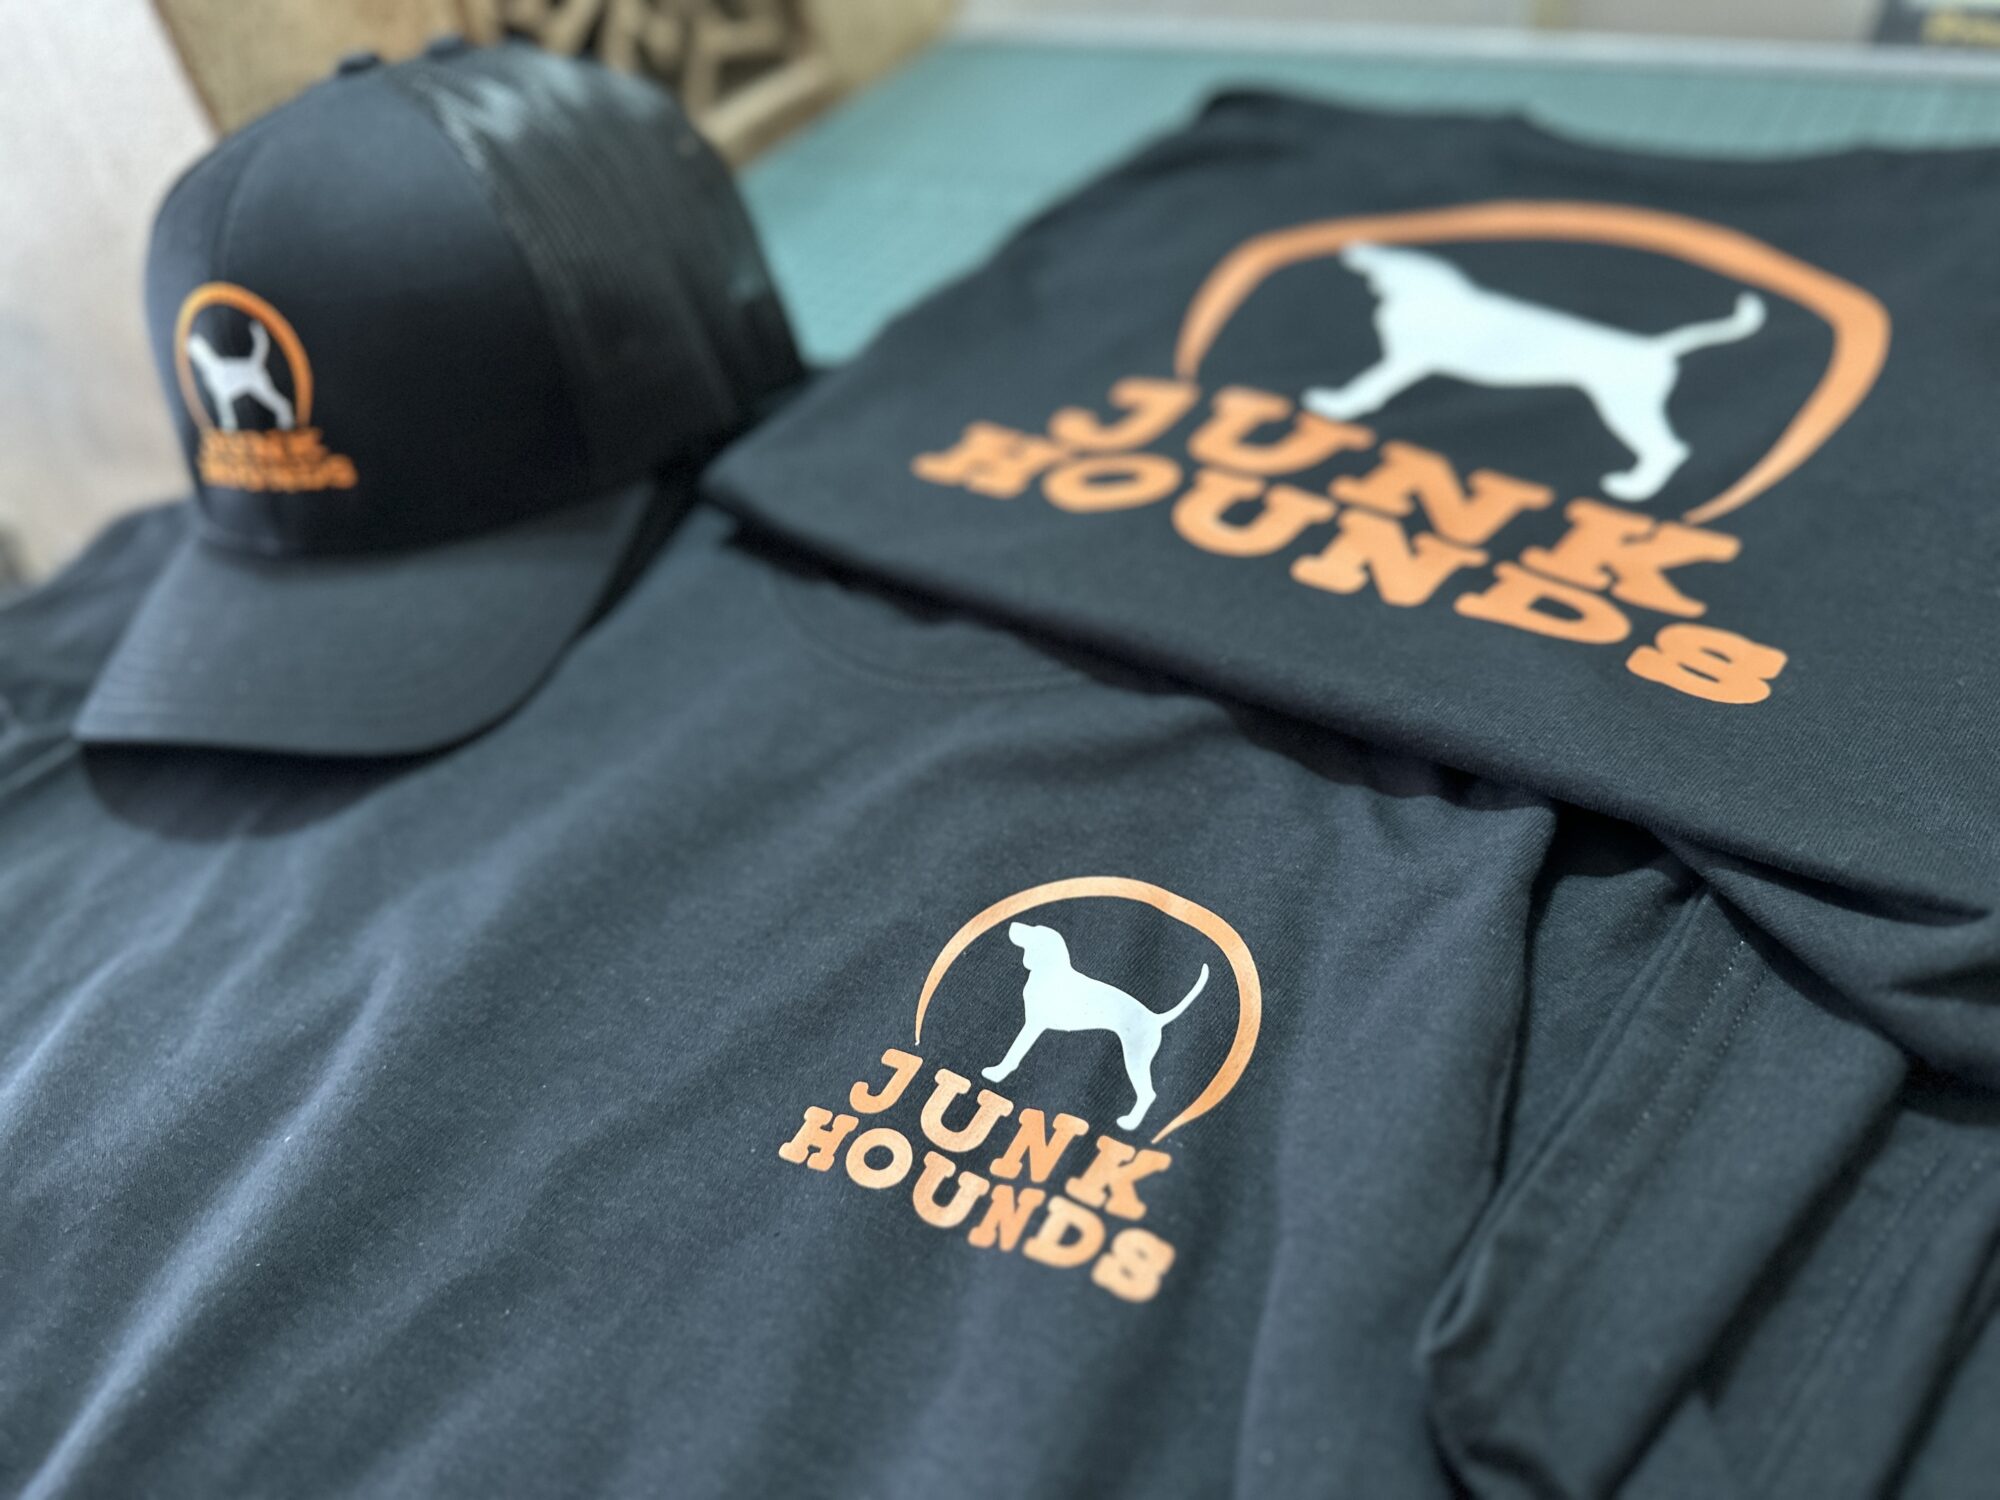 Custom screen print, vinyl and embroidery for company t-shirts and hats